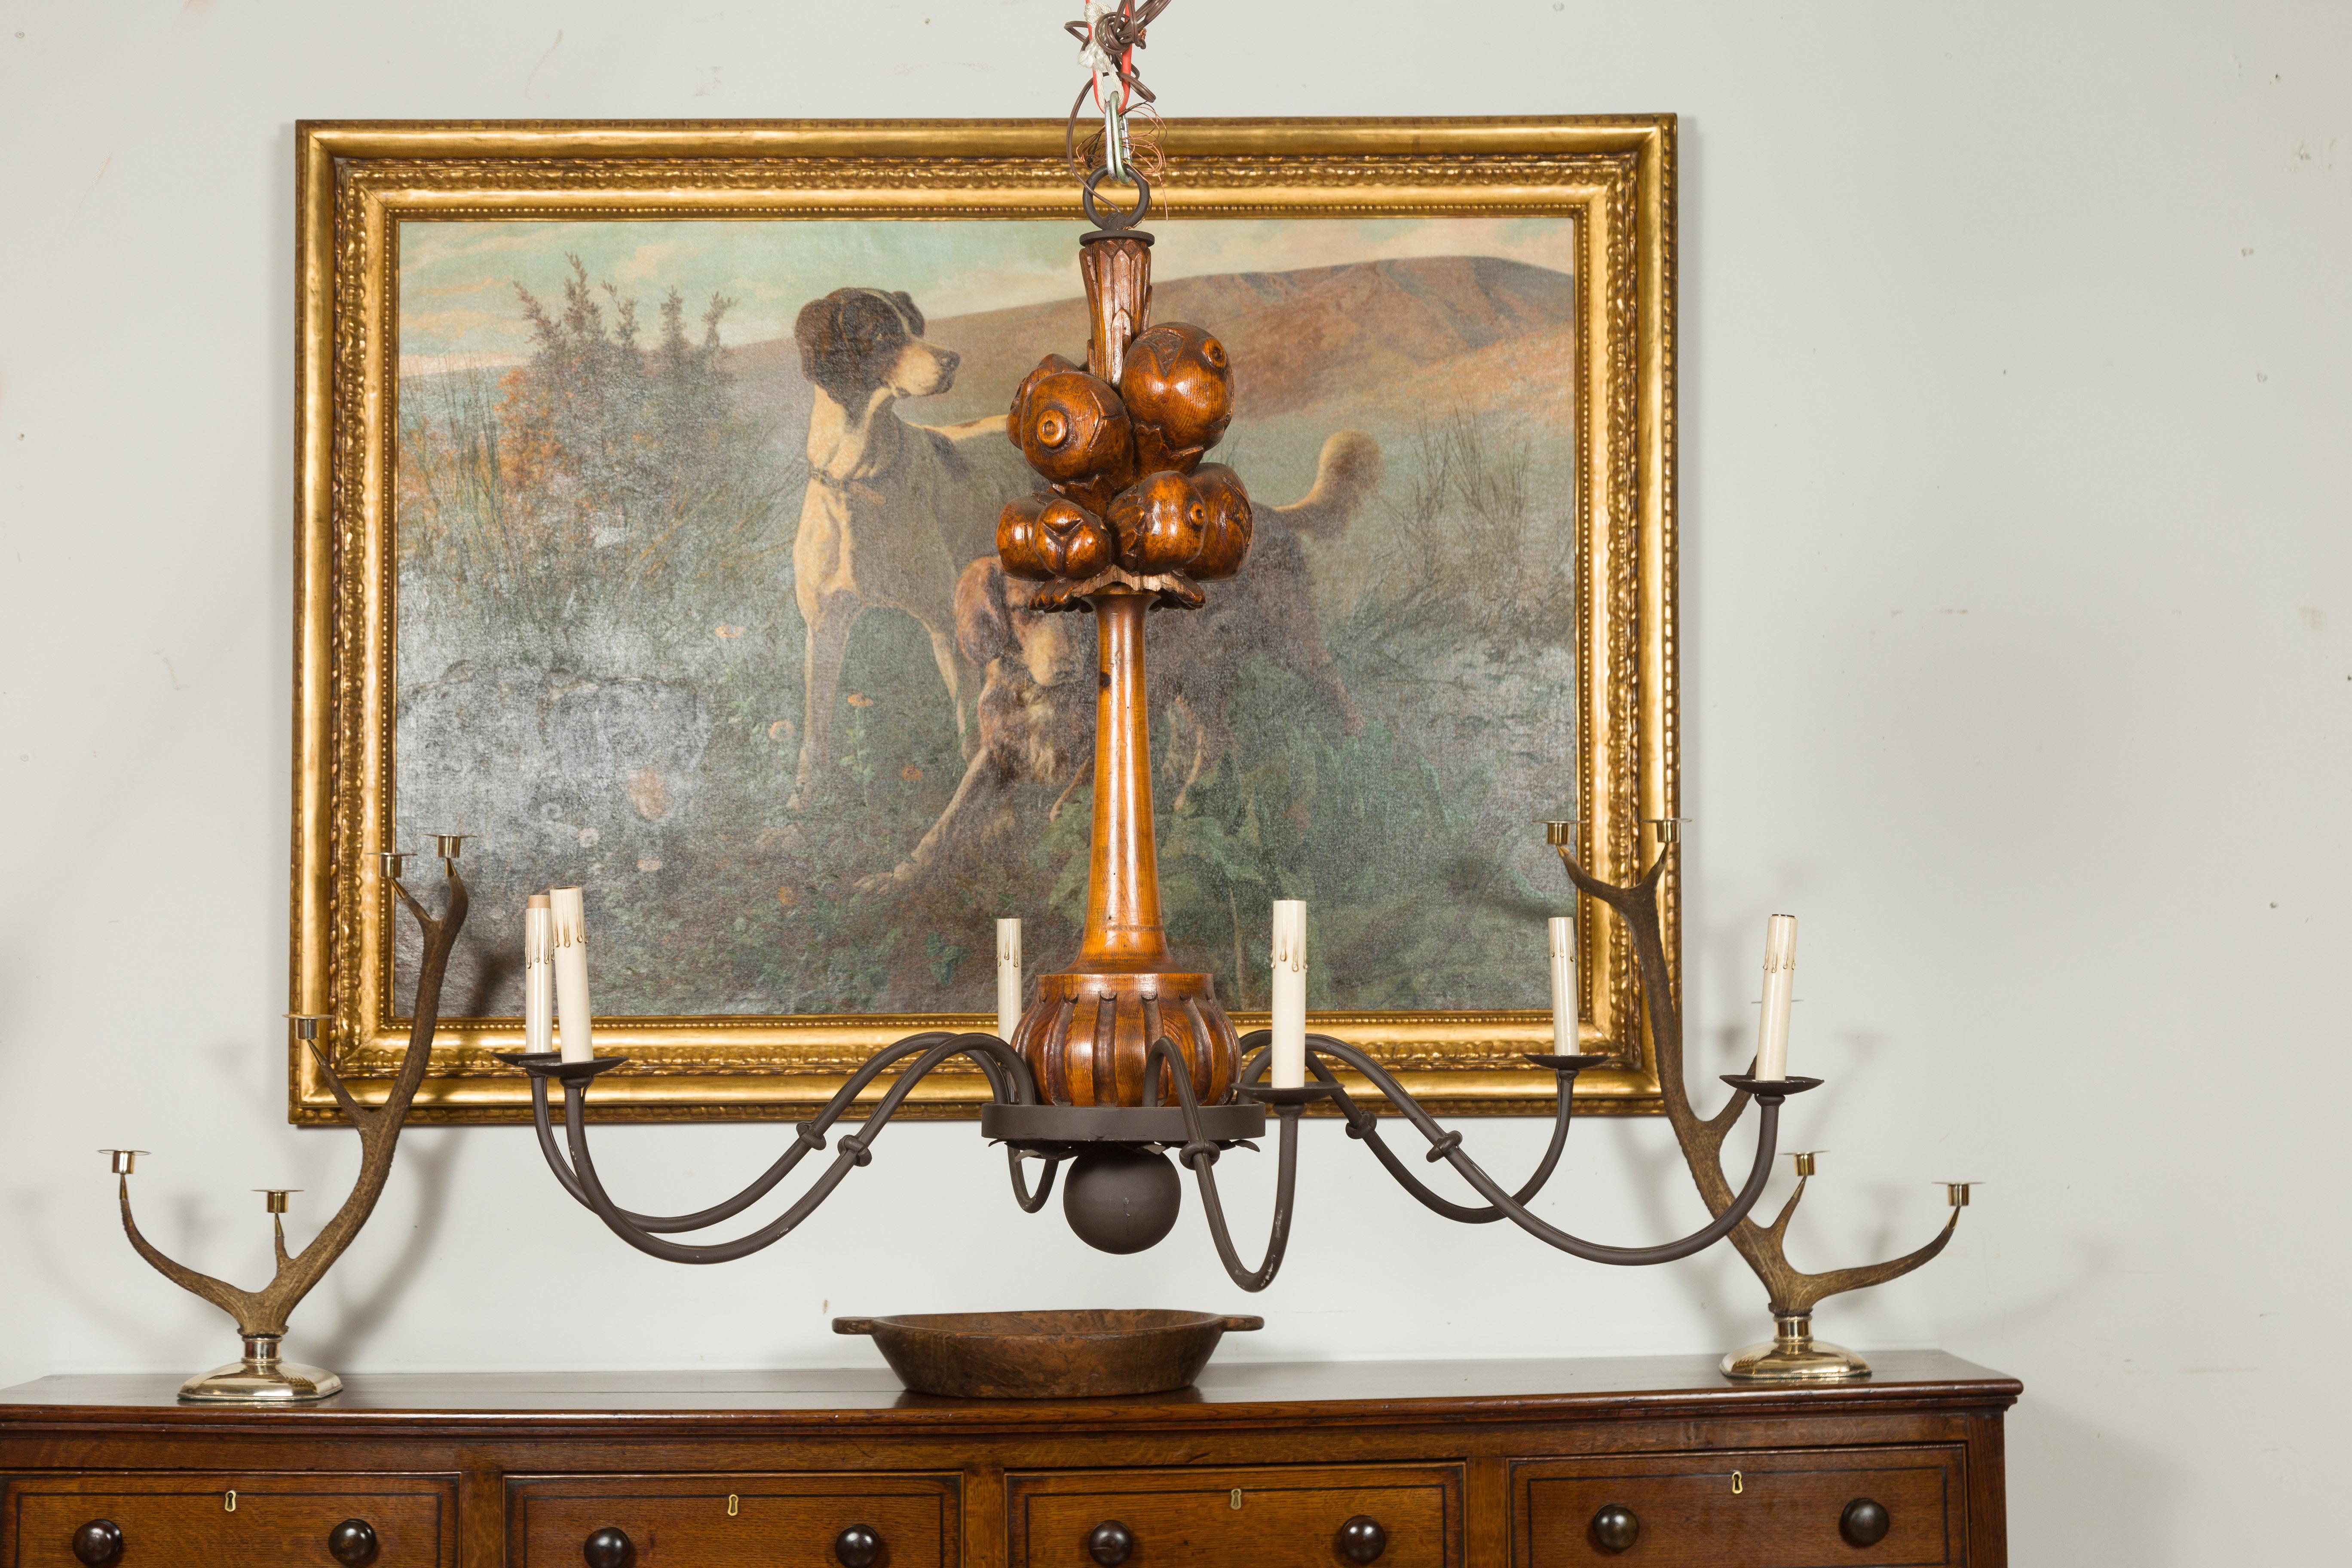 A pair of large English carved oak or pine six-light chandeliers from the early 20th century, with fruit motifs and swooping arms. Created in England during the first quarter of the 20th century, each of this pair of chandeliers attracts our